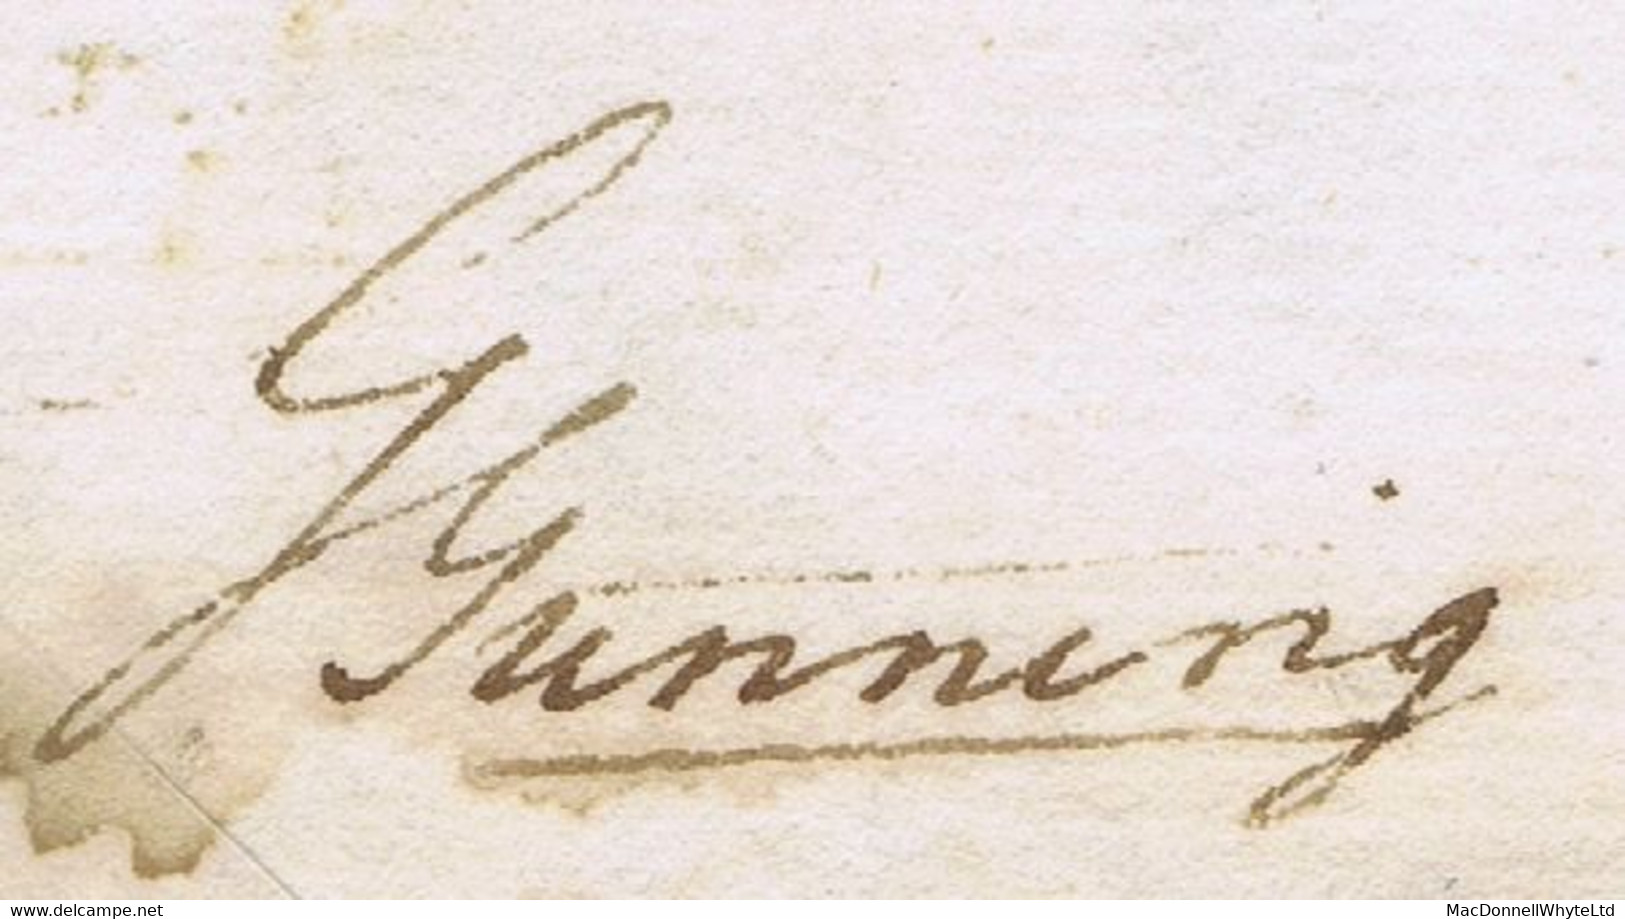 Northampton Free Franking Abuse 1805 Letter Franked Free Sir George Gunning NORTHAMPTON 66 Mileage Cds OCT 12 1805 - ...-1840 Voorlopers